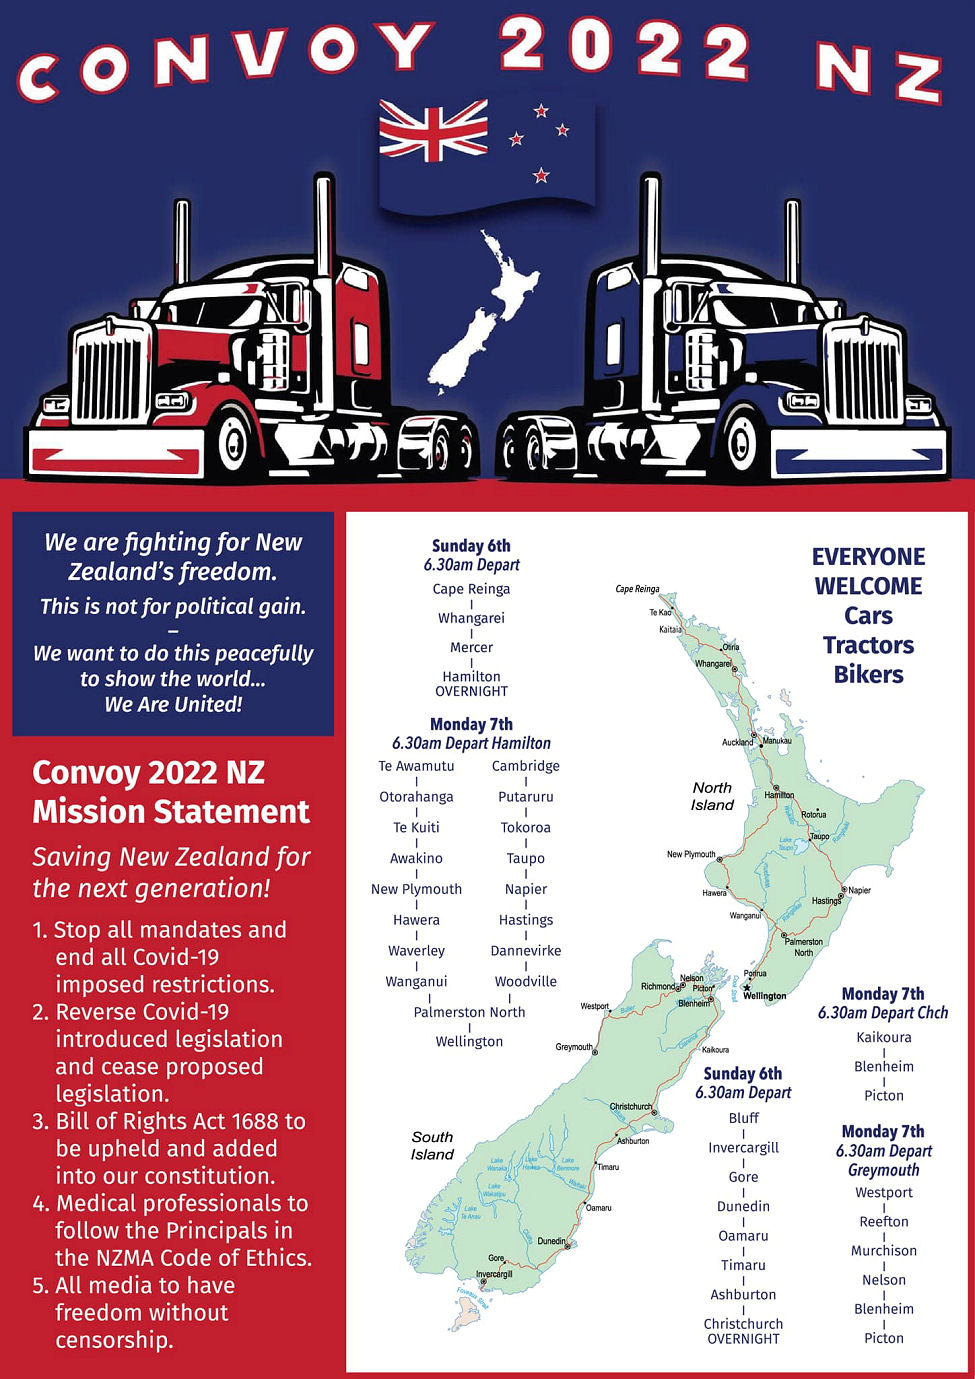 Convoy 2022 NZ - Commences 6th February 2022 - The real NZ Government will be driving and speaking